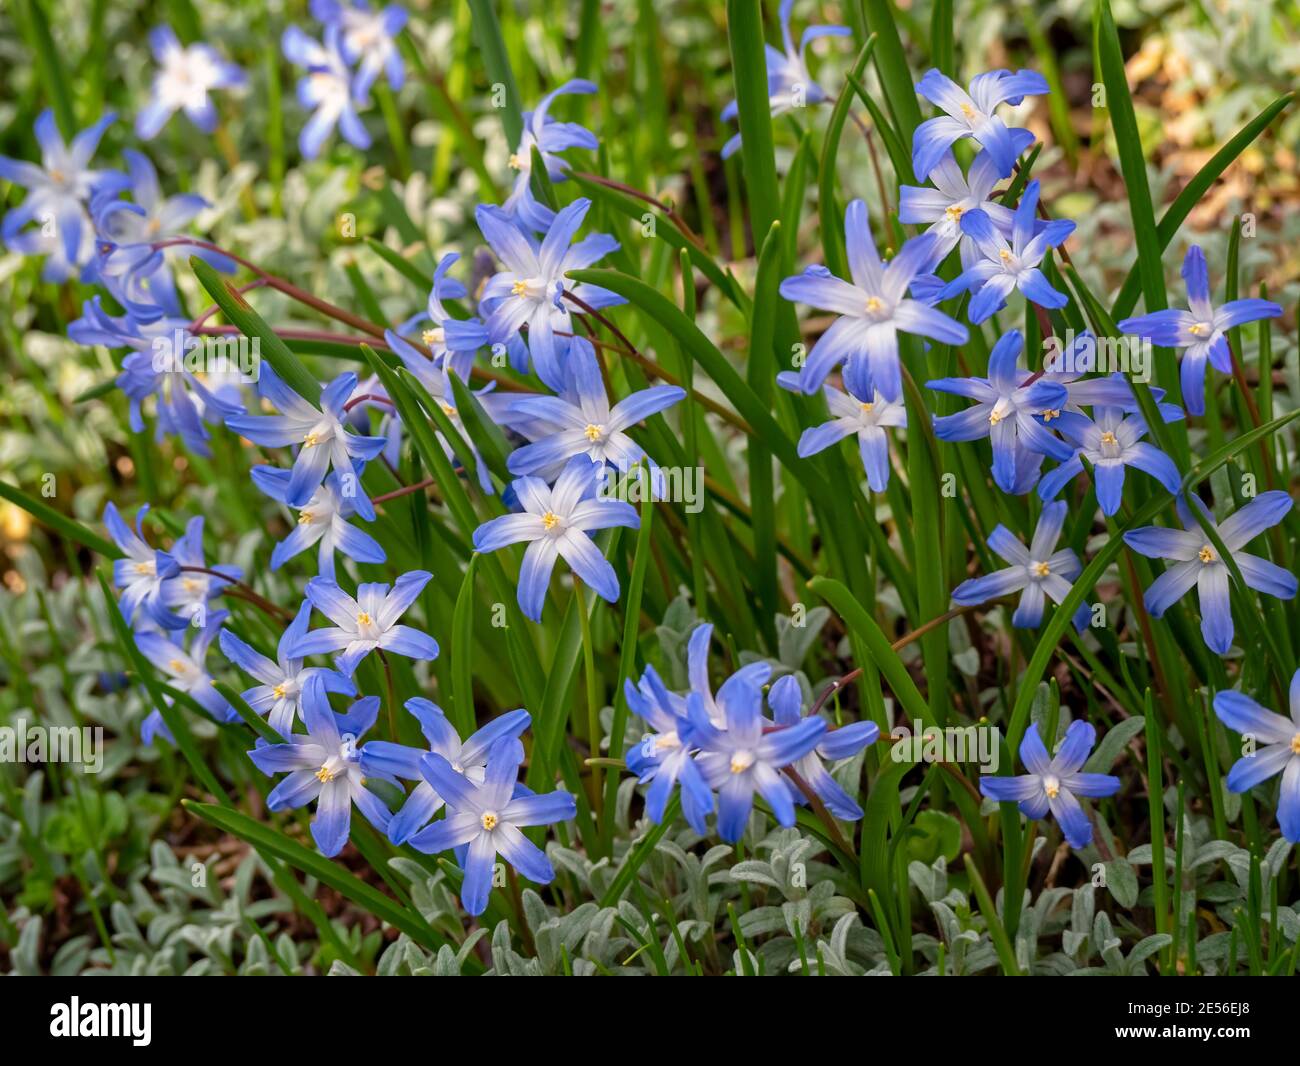 Chionodoxa luciliae, the Bossier's glory-of-the-snow, Lucile's glory-of-the-snow. Flowers for the garden, parks, landscape design, delighted attractiv Stock Photo